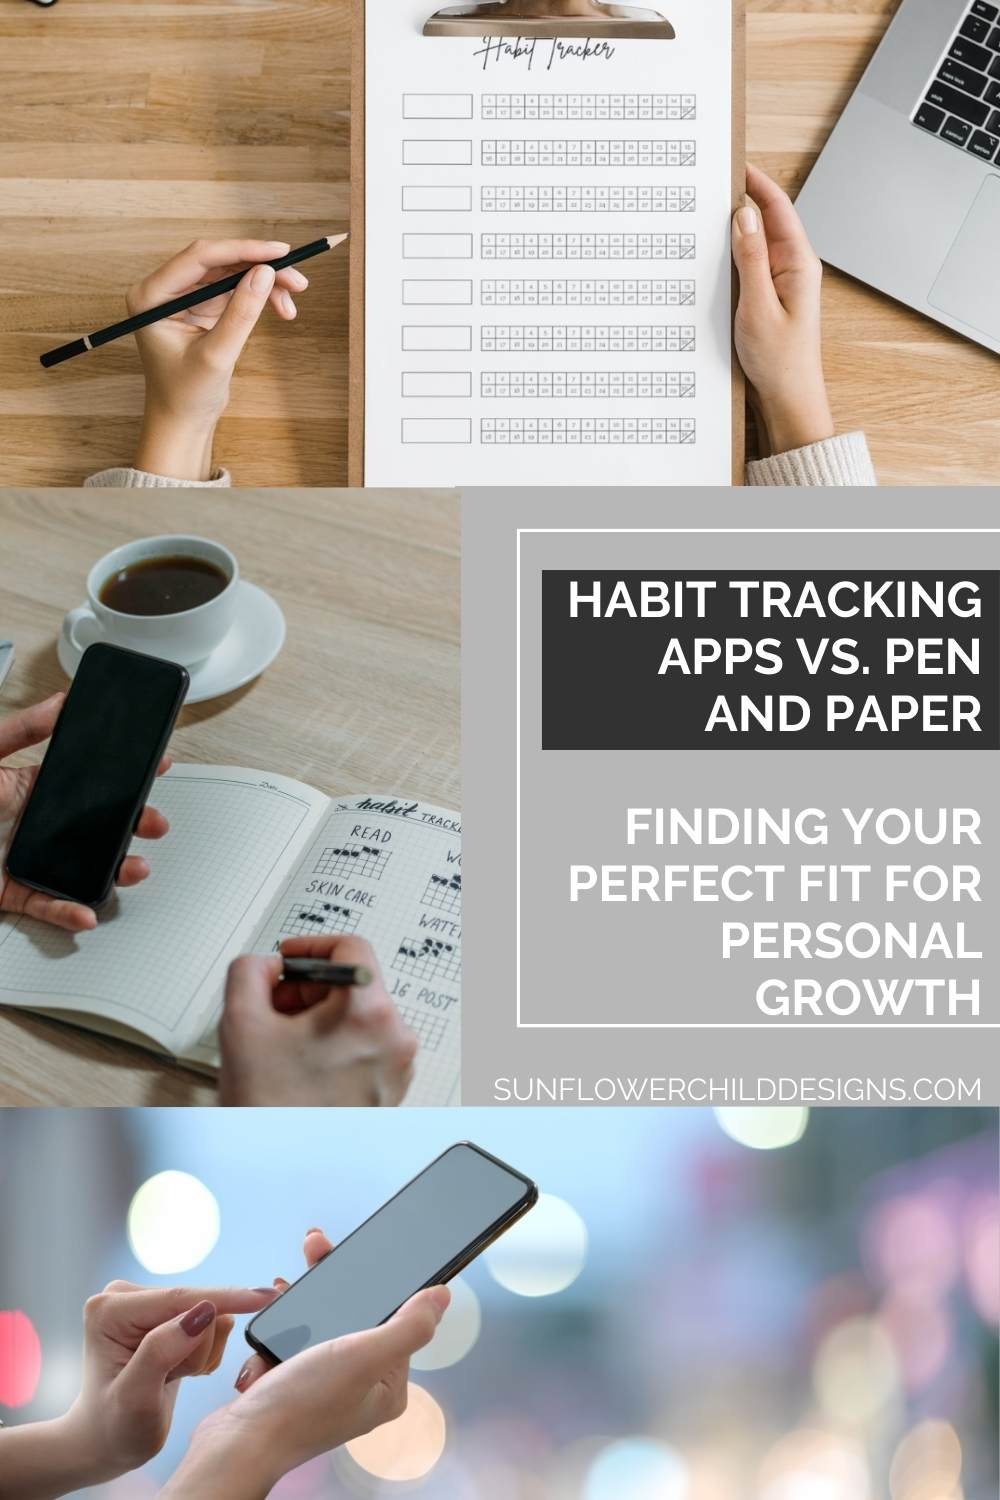 Discover the ideal tool for your personal growth journey! Delve into the pros and cons of habit tracking apps and traditional pen and paper methods.